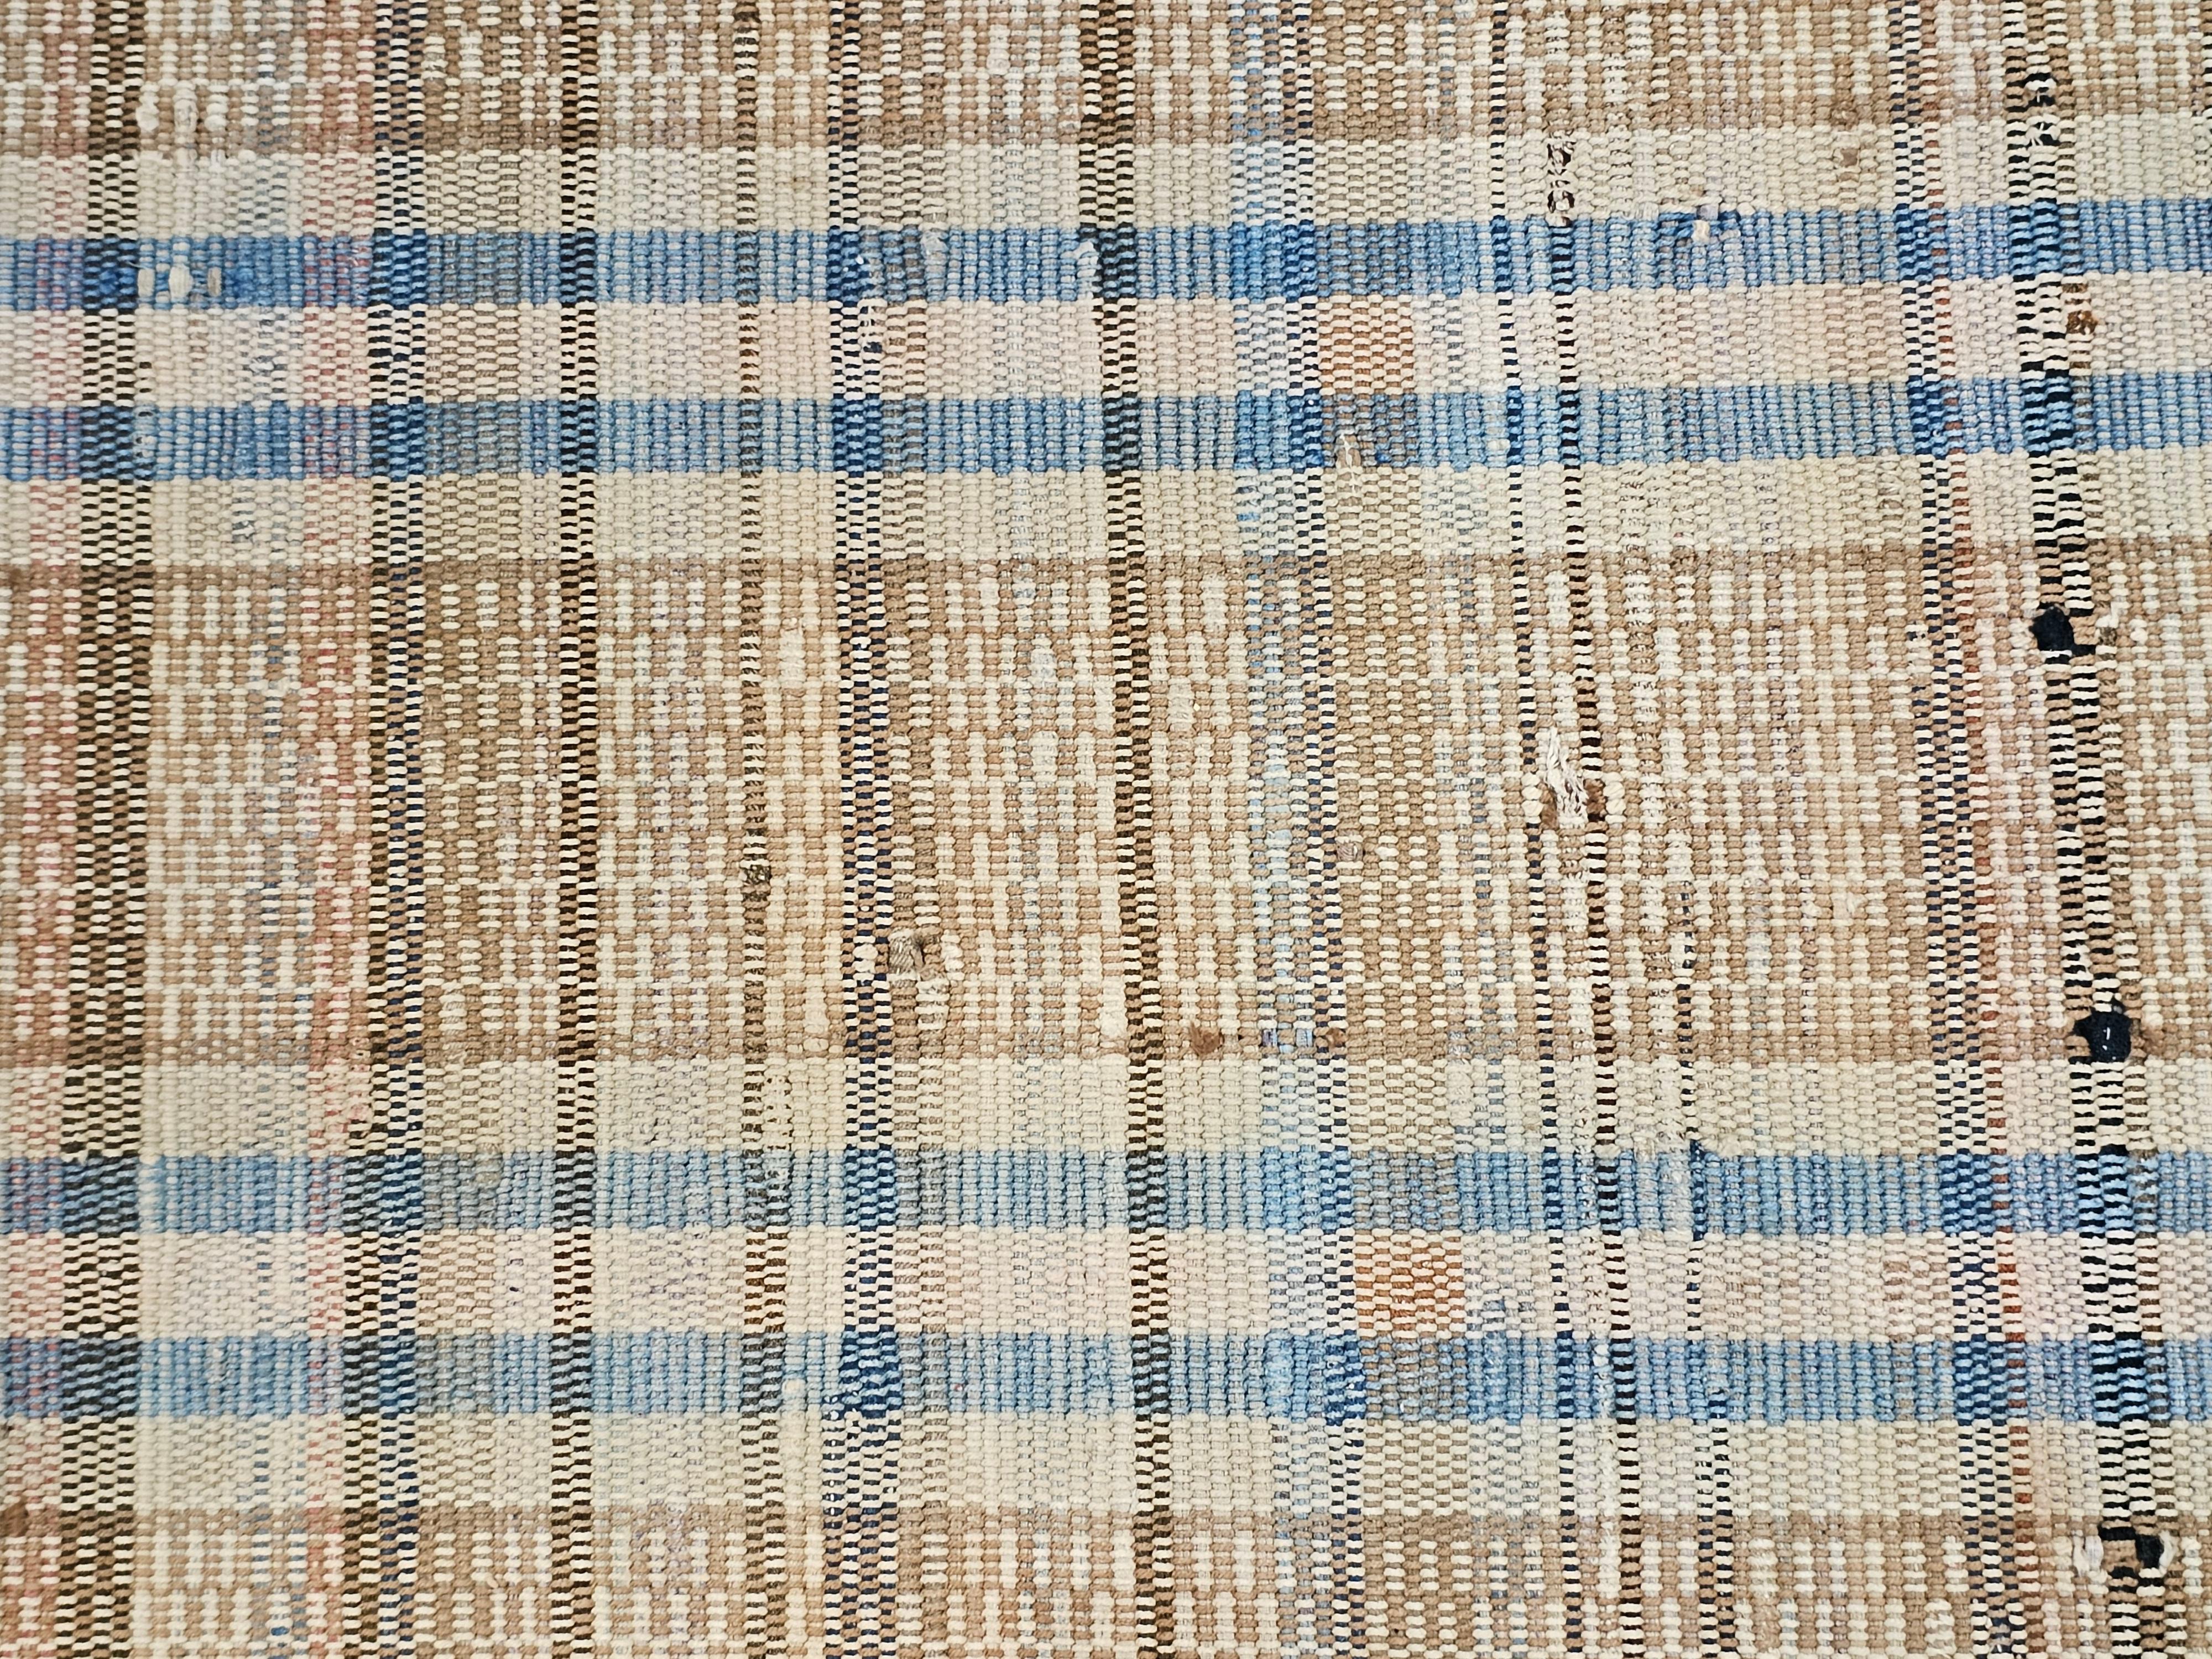 Vintage Hand-Woven American Amish Rag Runner in Pale Blue, Pink, Wheat, Caramel For Sale 1